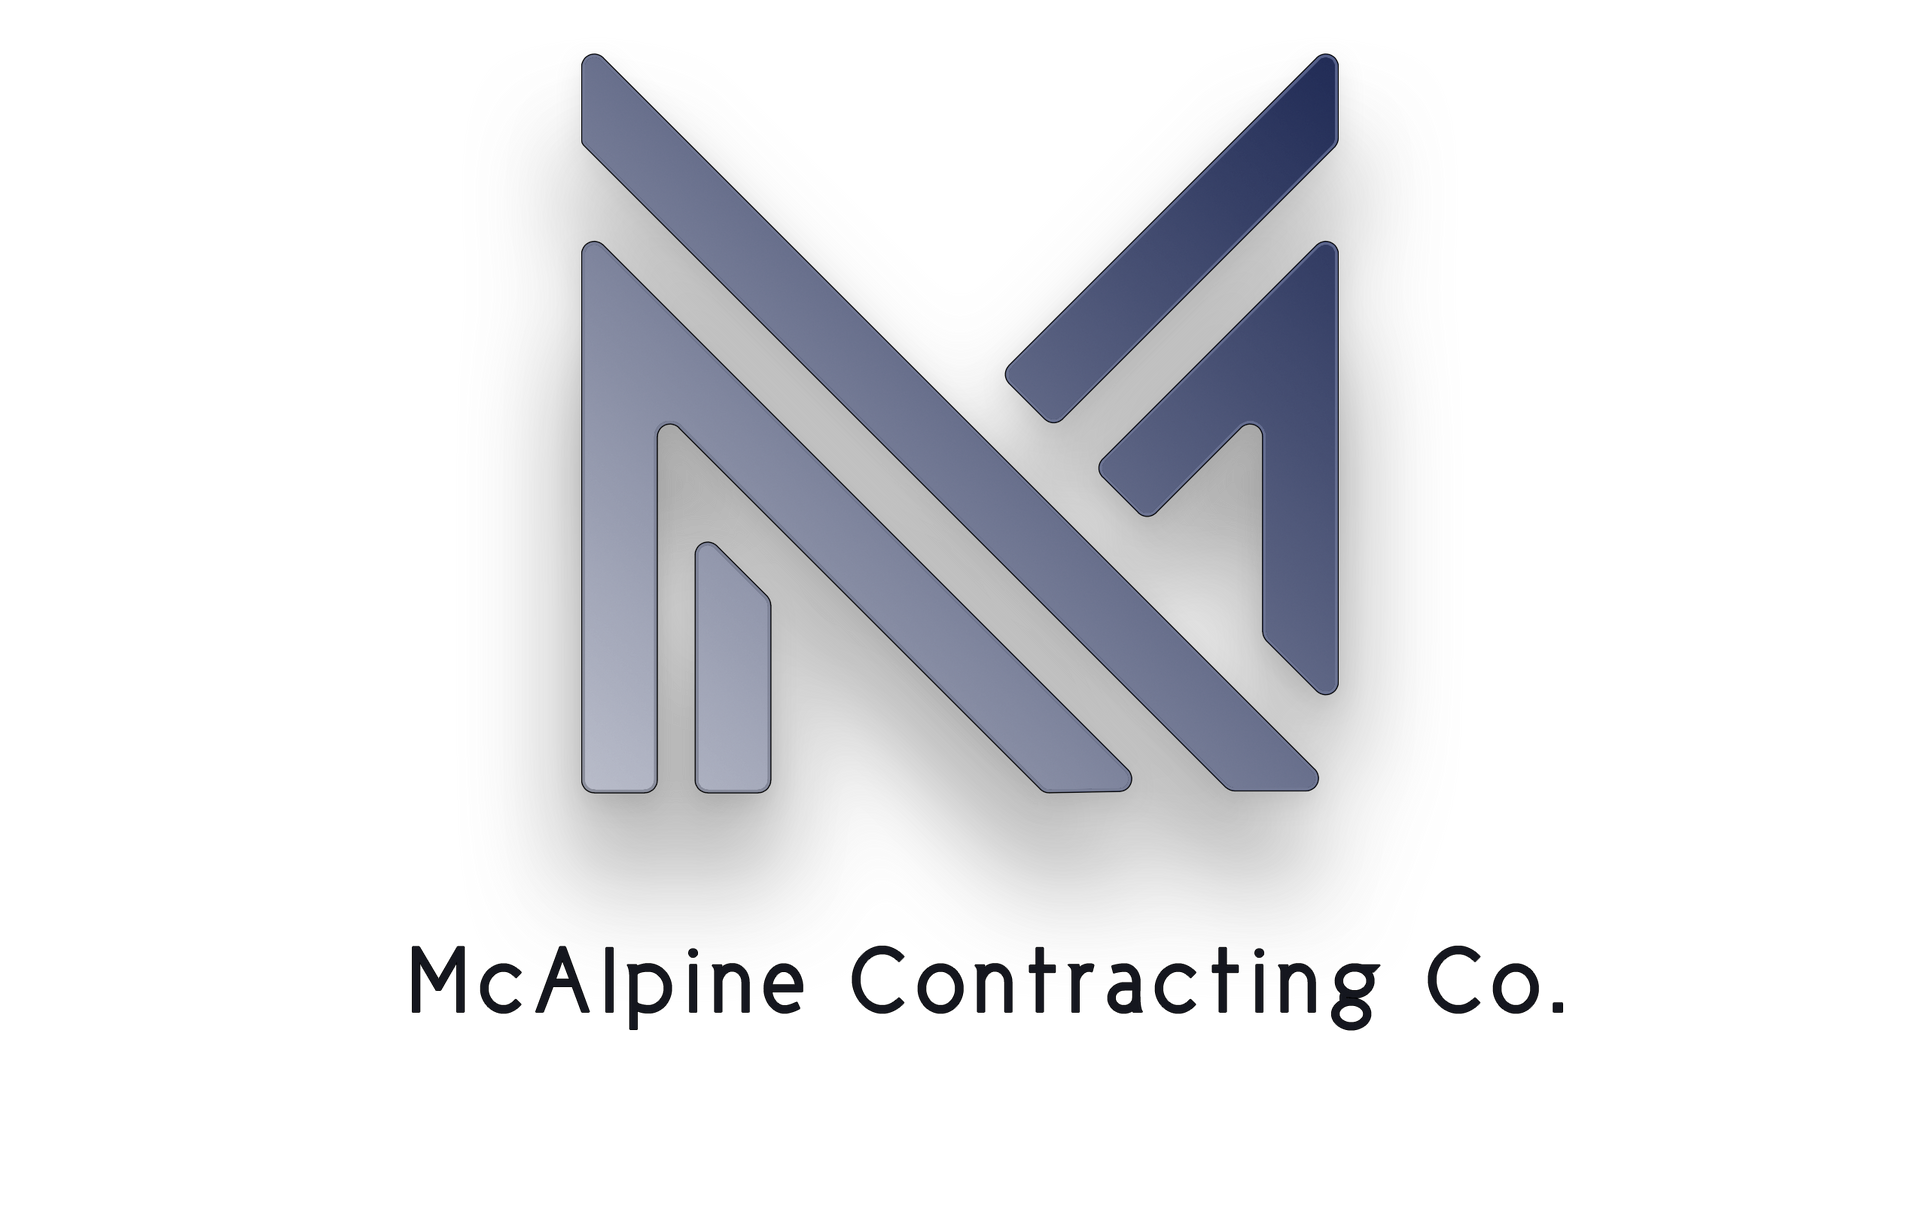 a logo for a company called malpine contracting co.